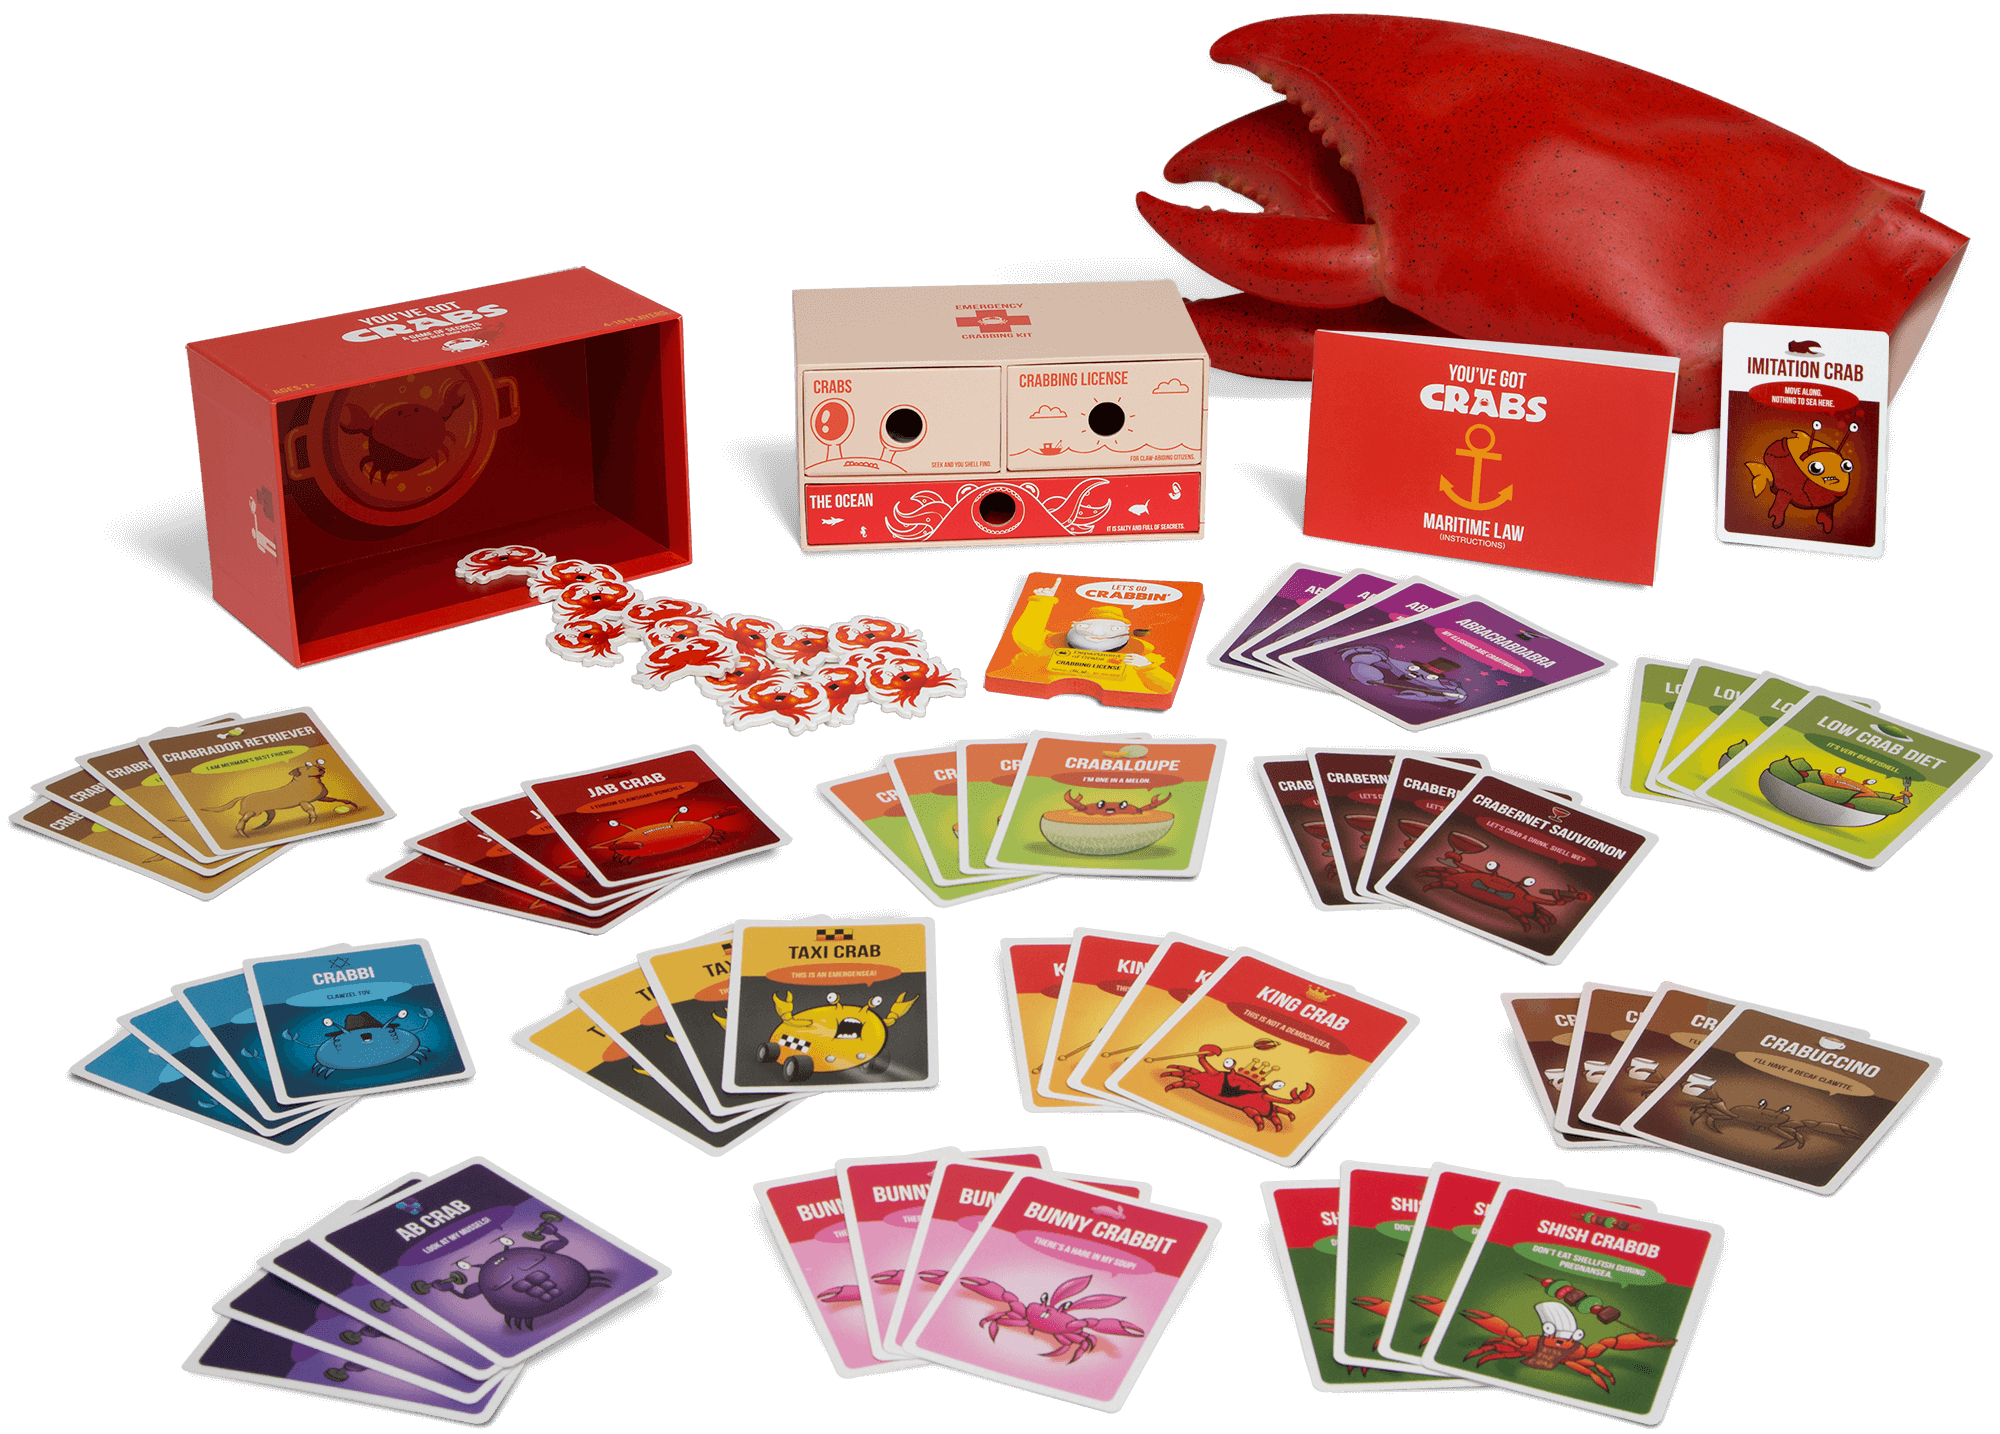 YOU'VE GOT CRABS + IMITATION CRAB EXPANSION Party Game By